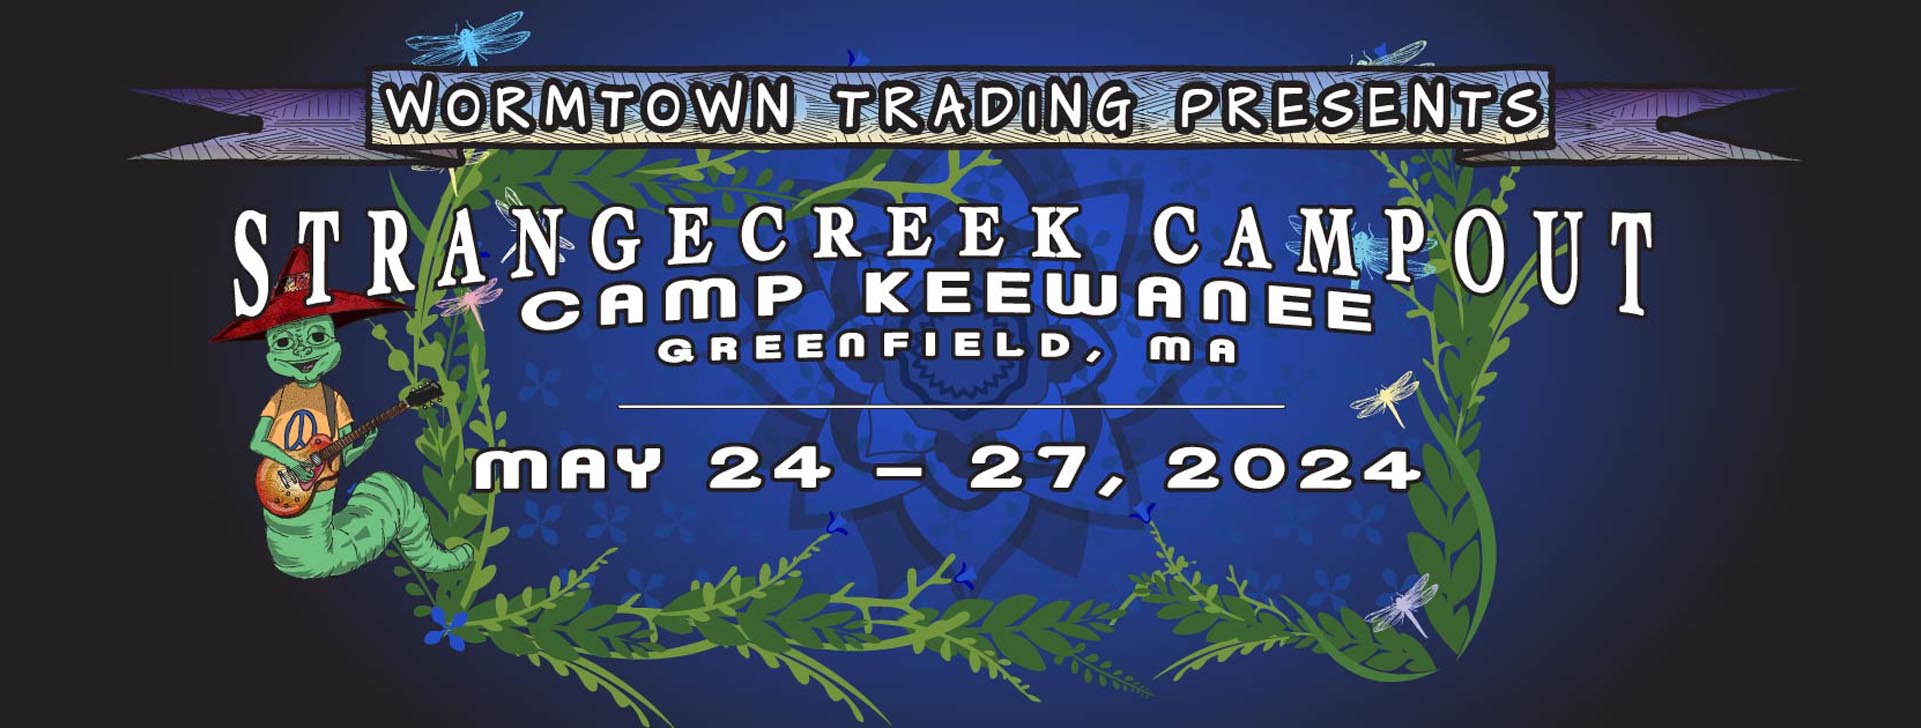 Wormtown Trading Presents
StrangeCreek Campout
Camp Keewanee
Greenfield, MA
May 24-27, 2024